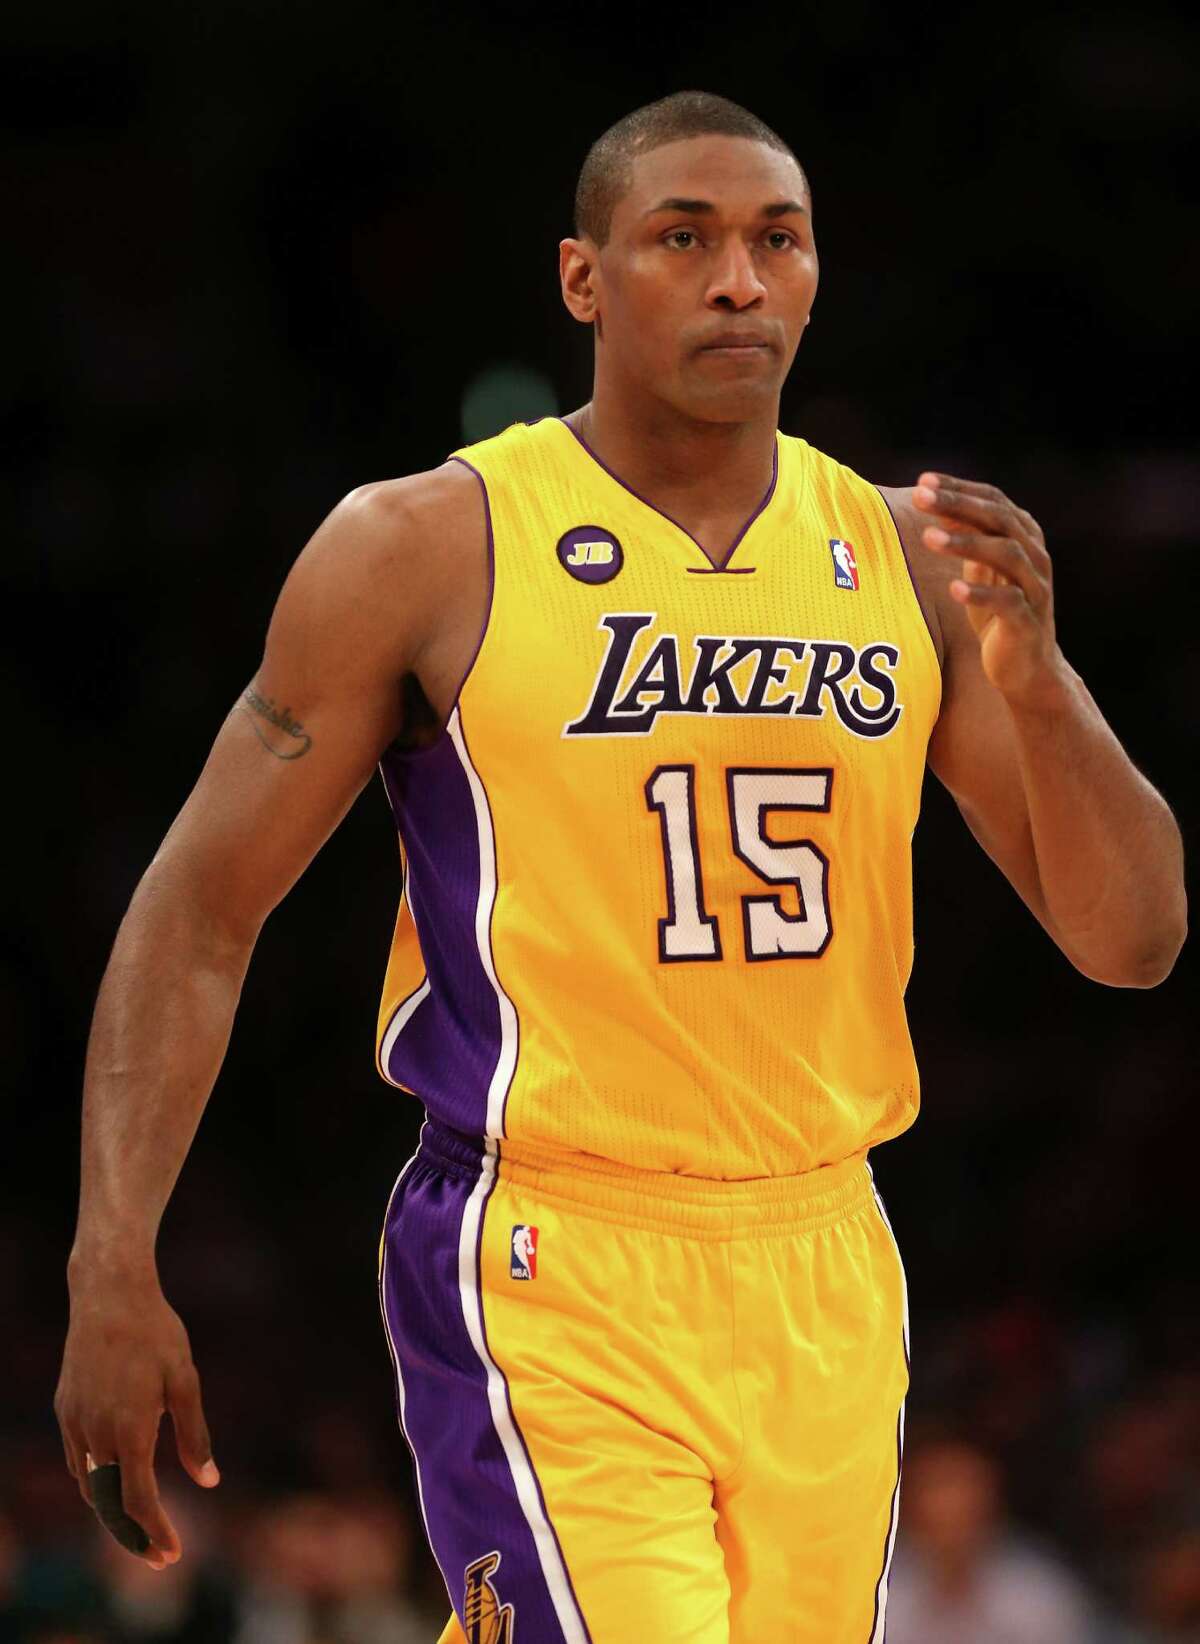 Metta World Peace was waived by the Lakers using the NBA's amnesty provision. He spent four seasons with the team.